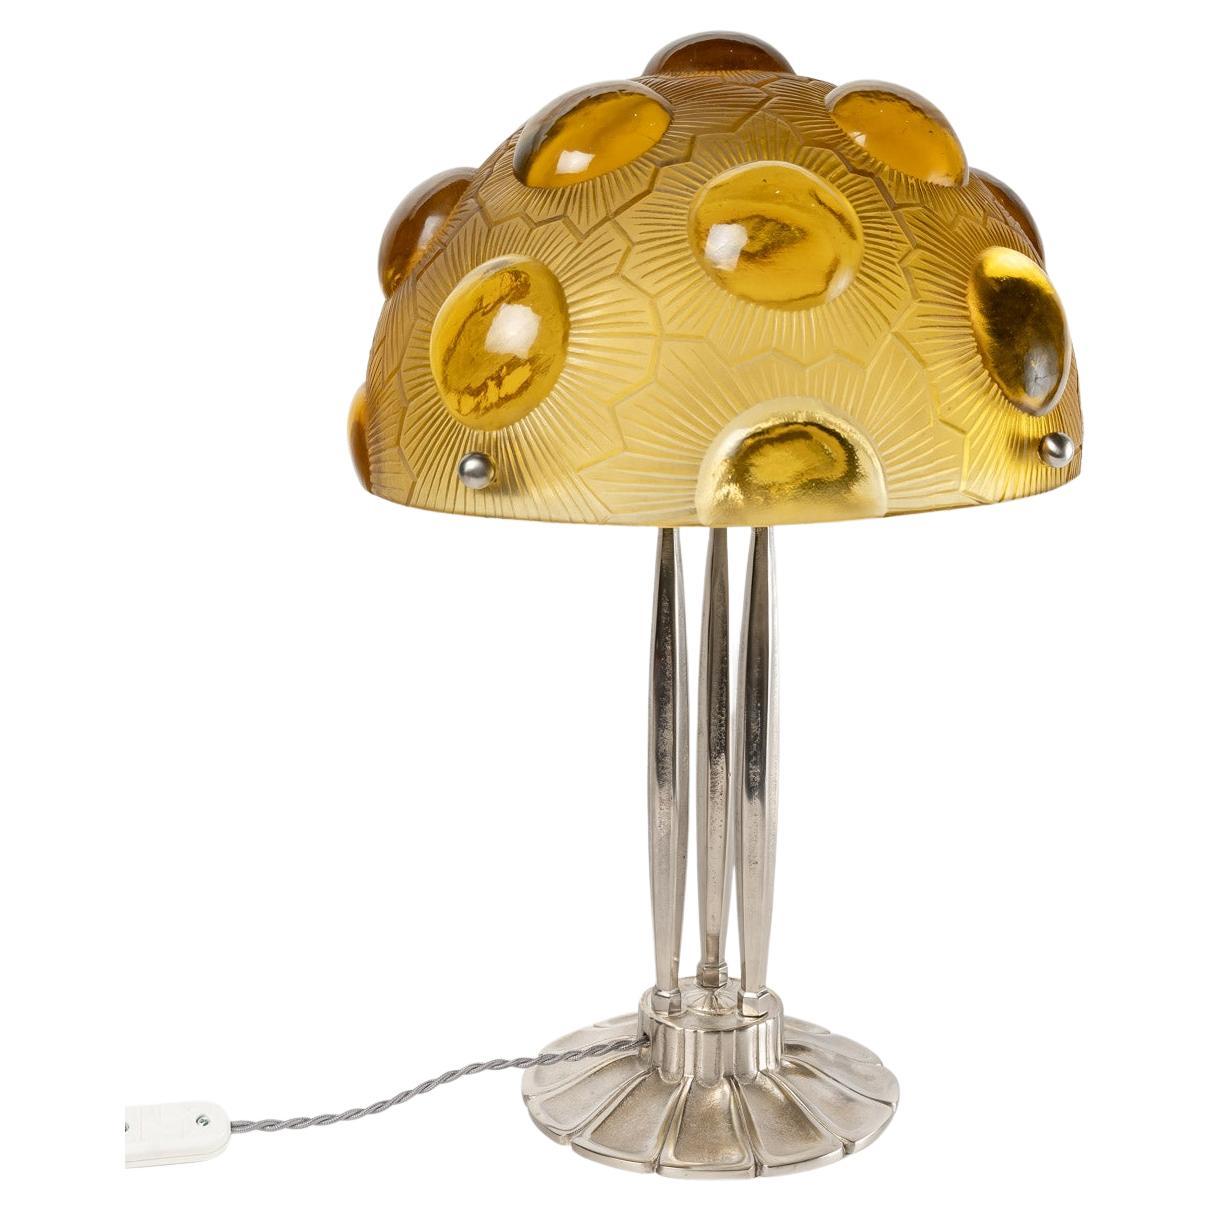 1926 René Lalique, Lamp Soleil Amber Yellow Glass and Nickel Plated Bronze